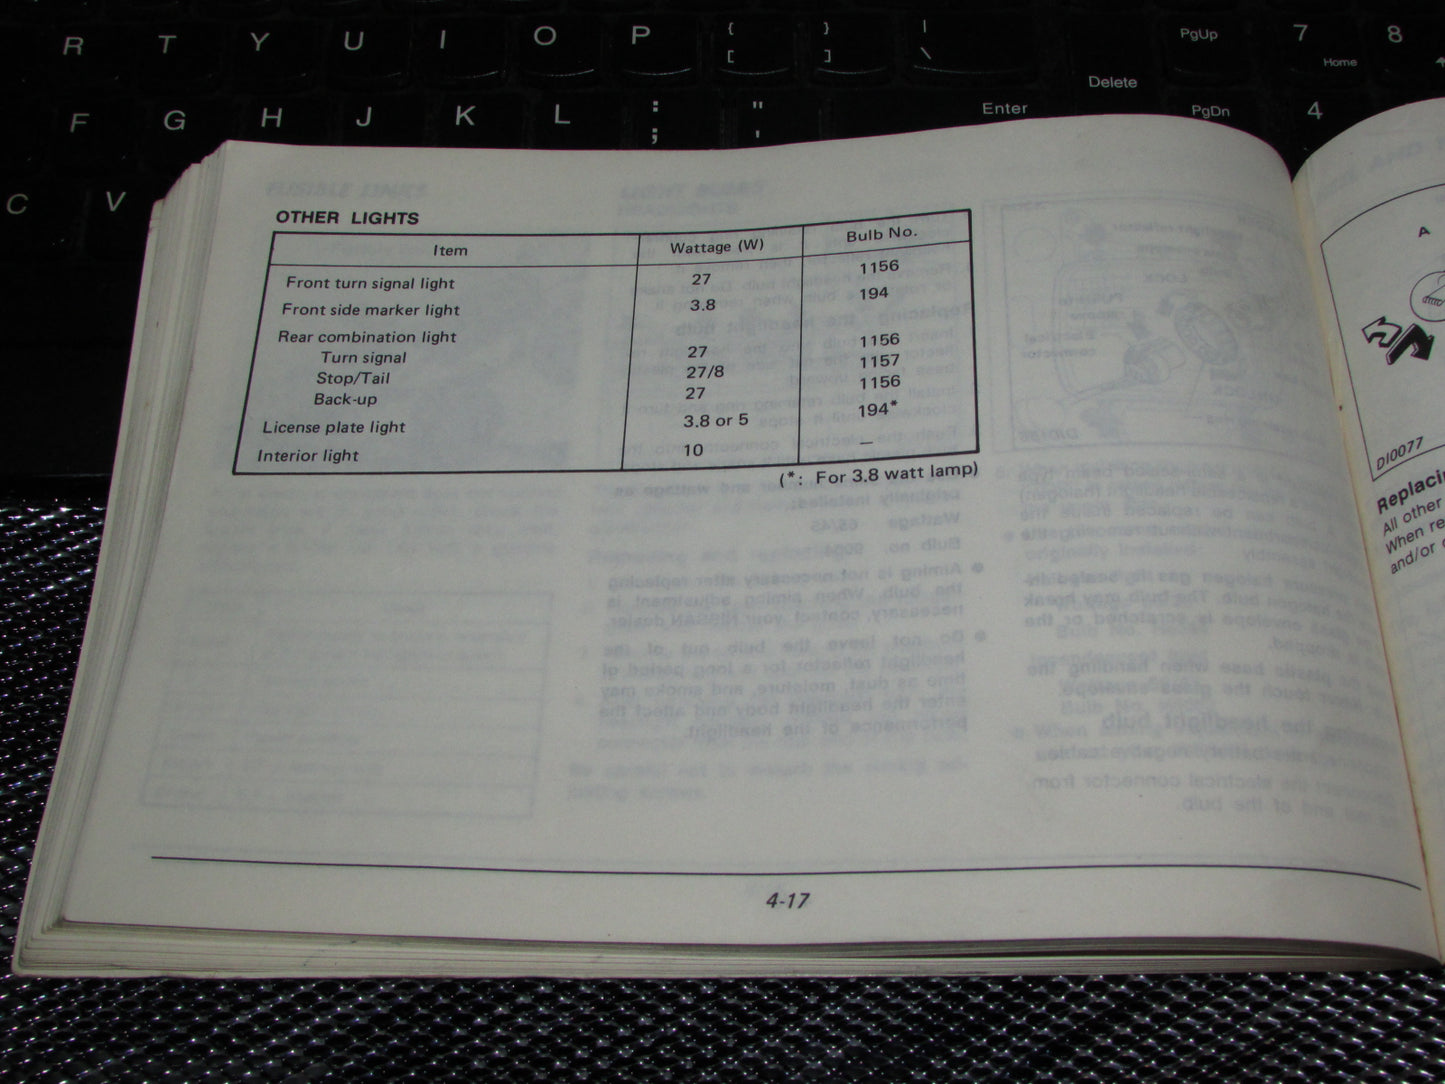 Nissan Pathfinder (1987) Owners Manual